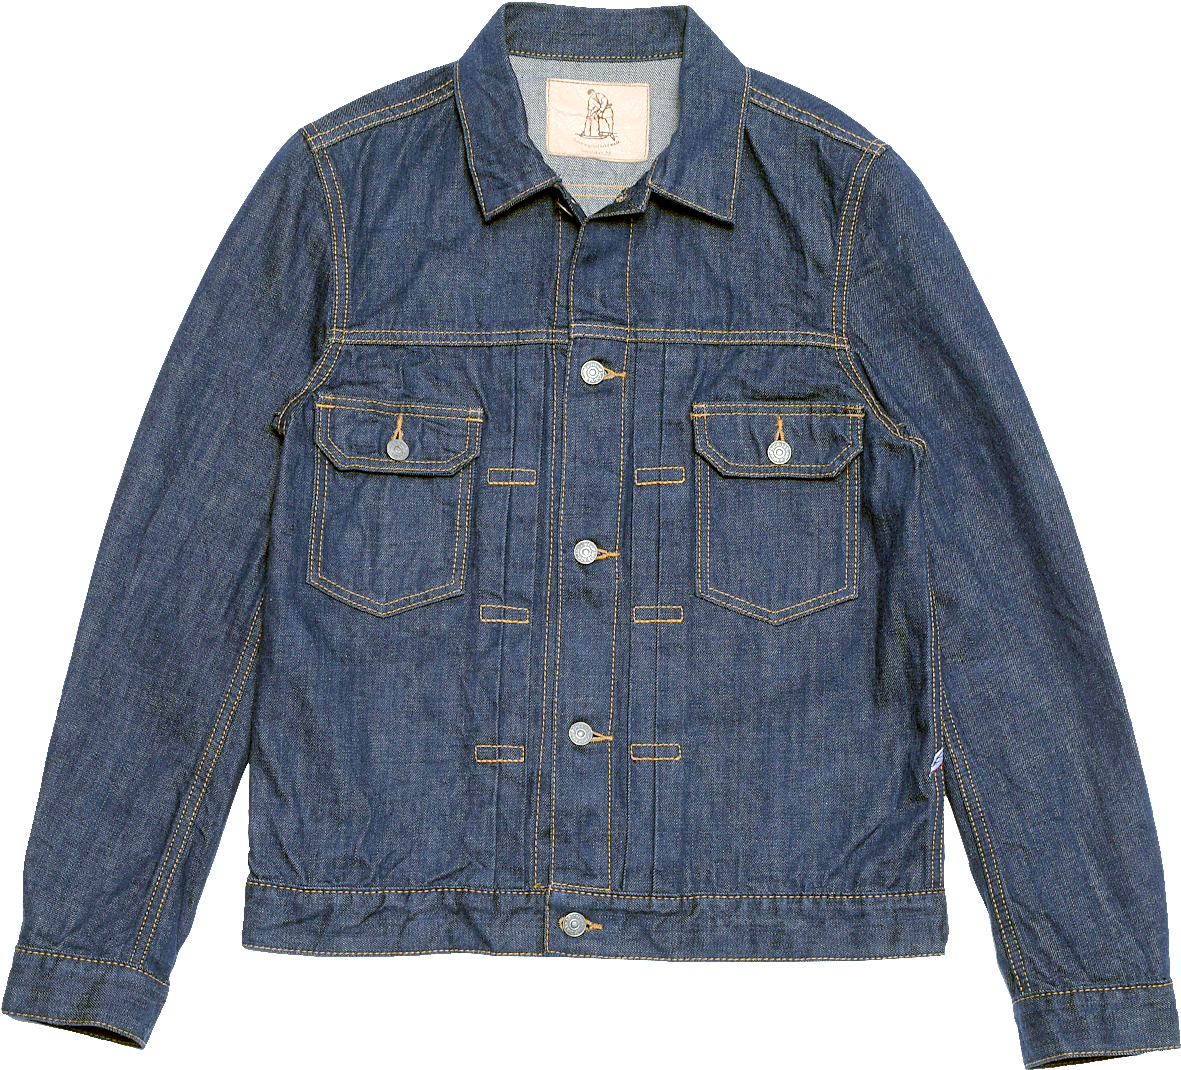 A Blue Denim Jacket With Buttons